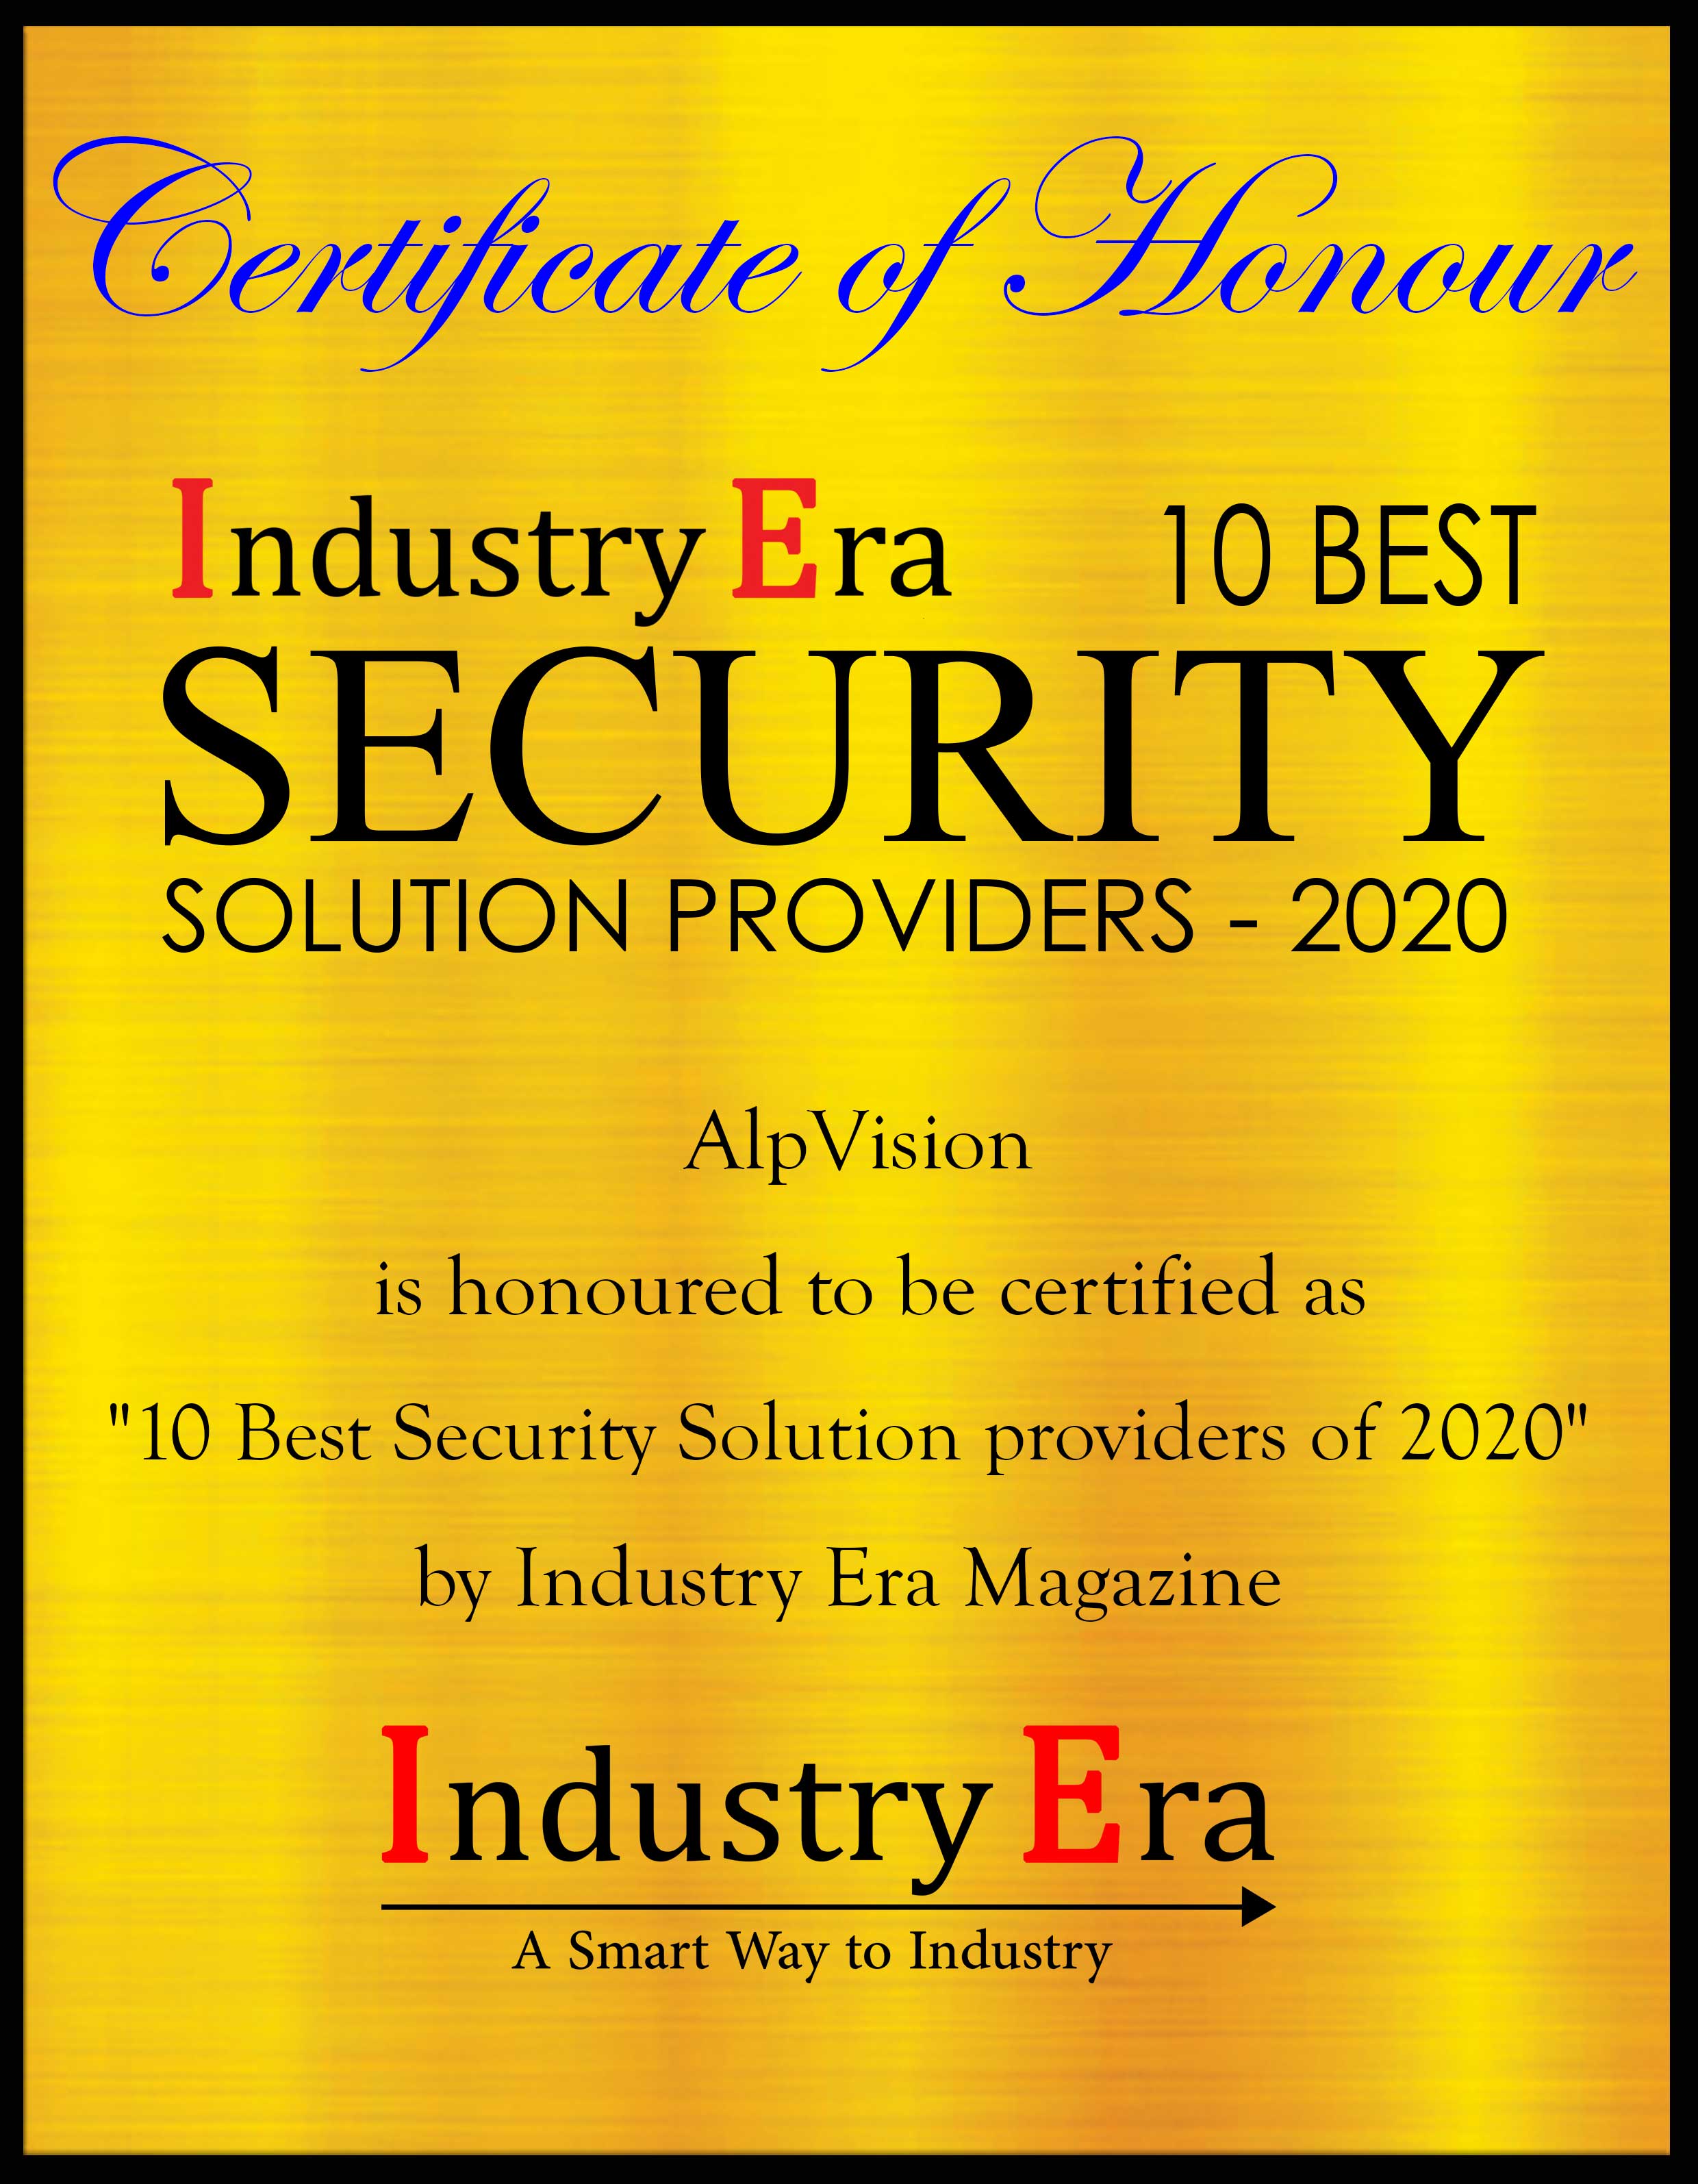 Dr. Martin Kutter President & Dr. Fred Jordan CEO AlpVision, 10 Best Security Solution Providers of 2020